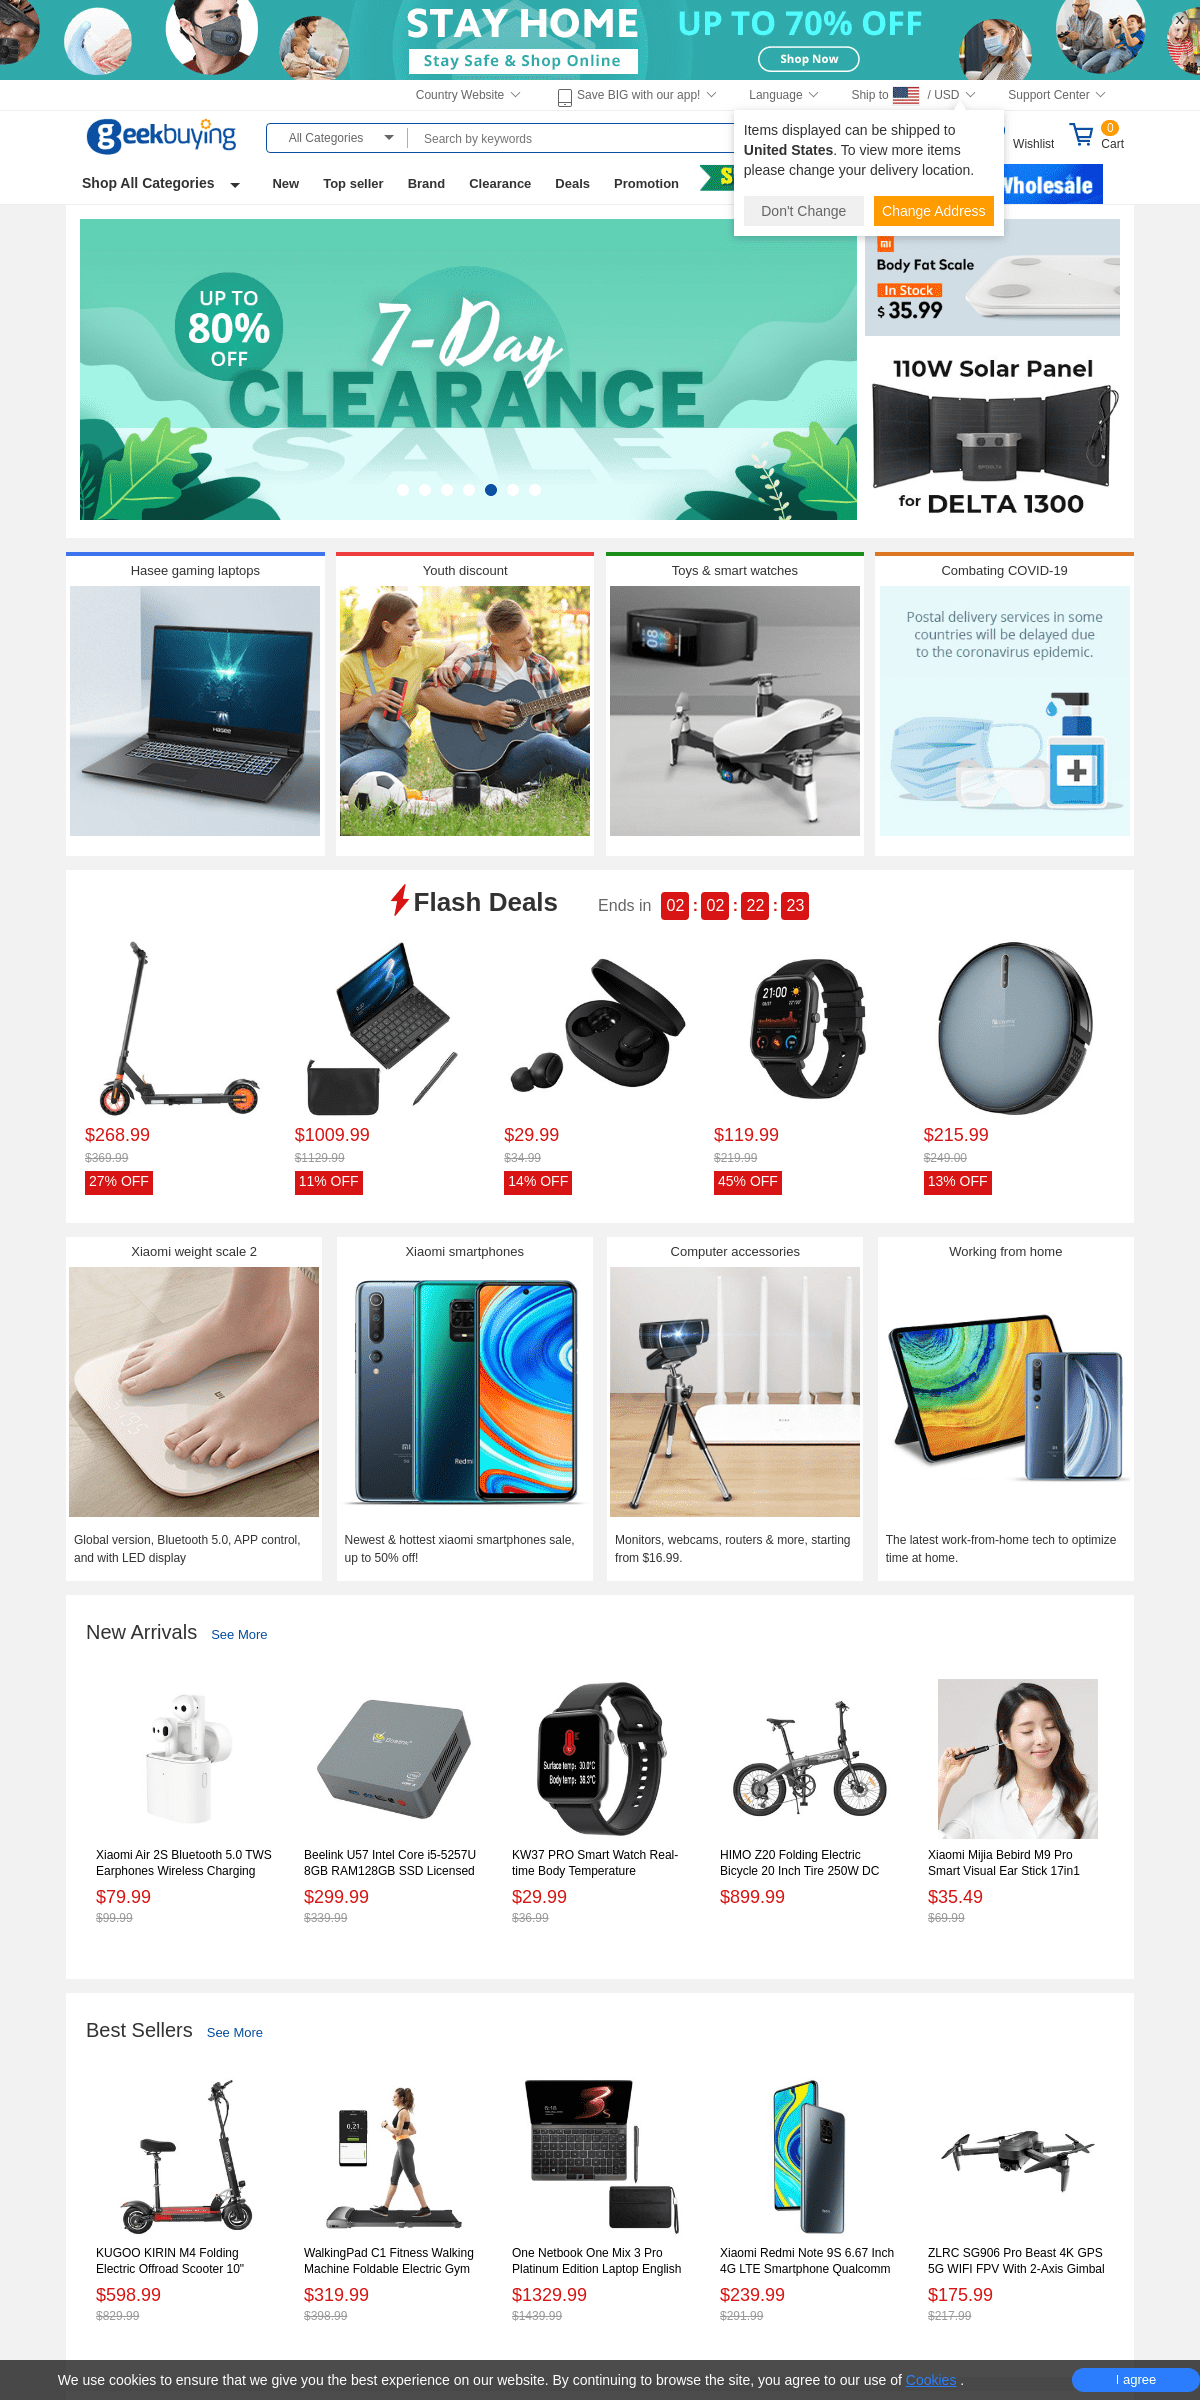 Online Shopping for Smartphones, TV Boxes, Laptops, RC Quadcopter, Wearables and more gadgets at Geekbuying